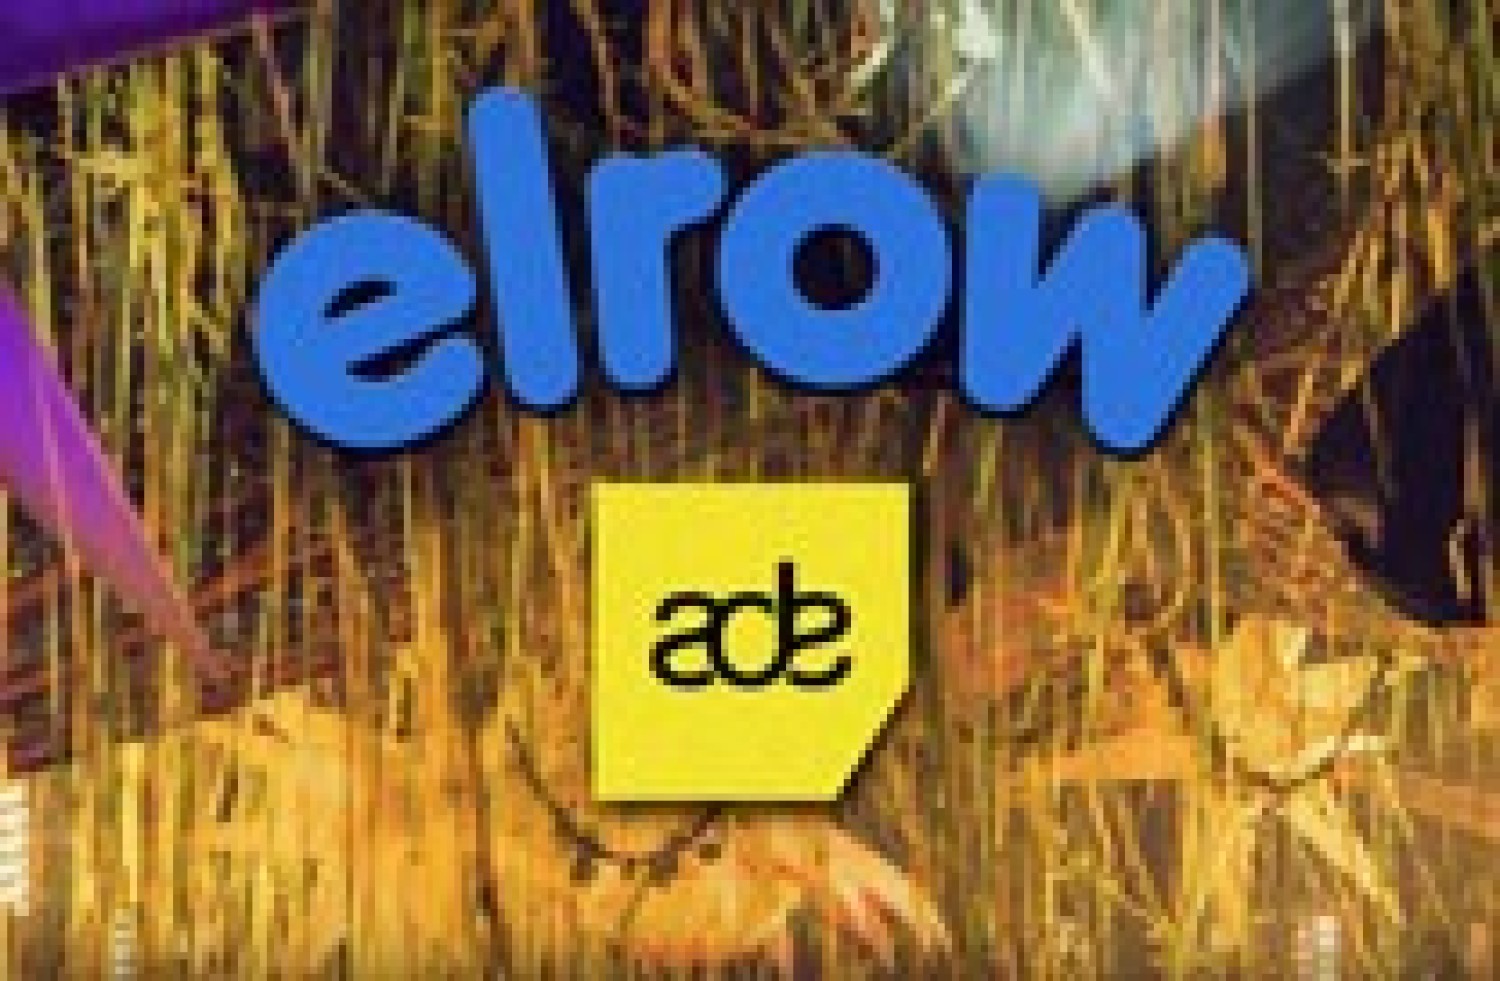 Party report: Elrow goes to ADE, Amsterdam (22-10-2017)